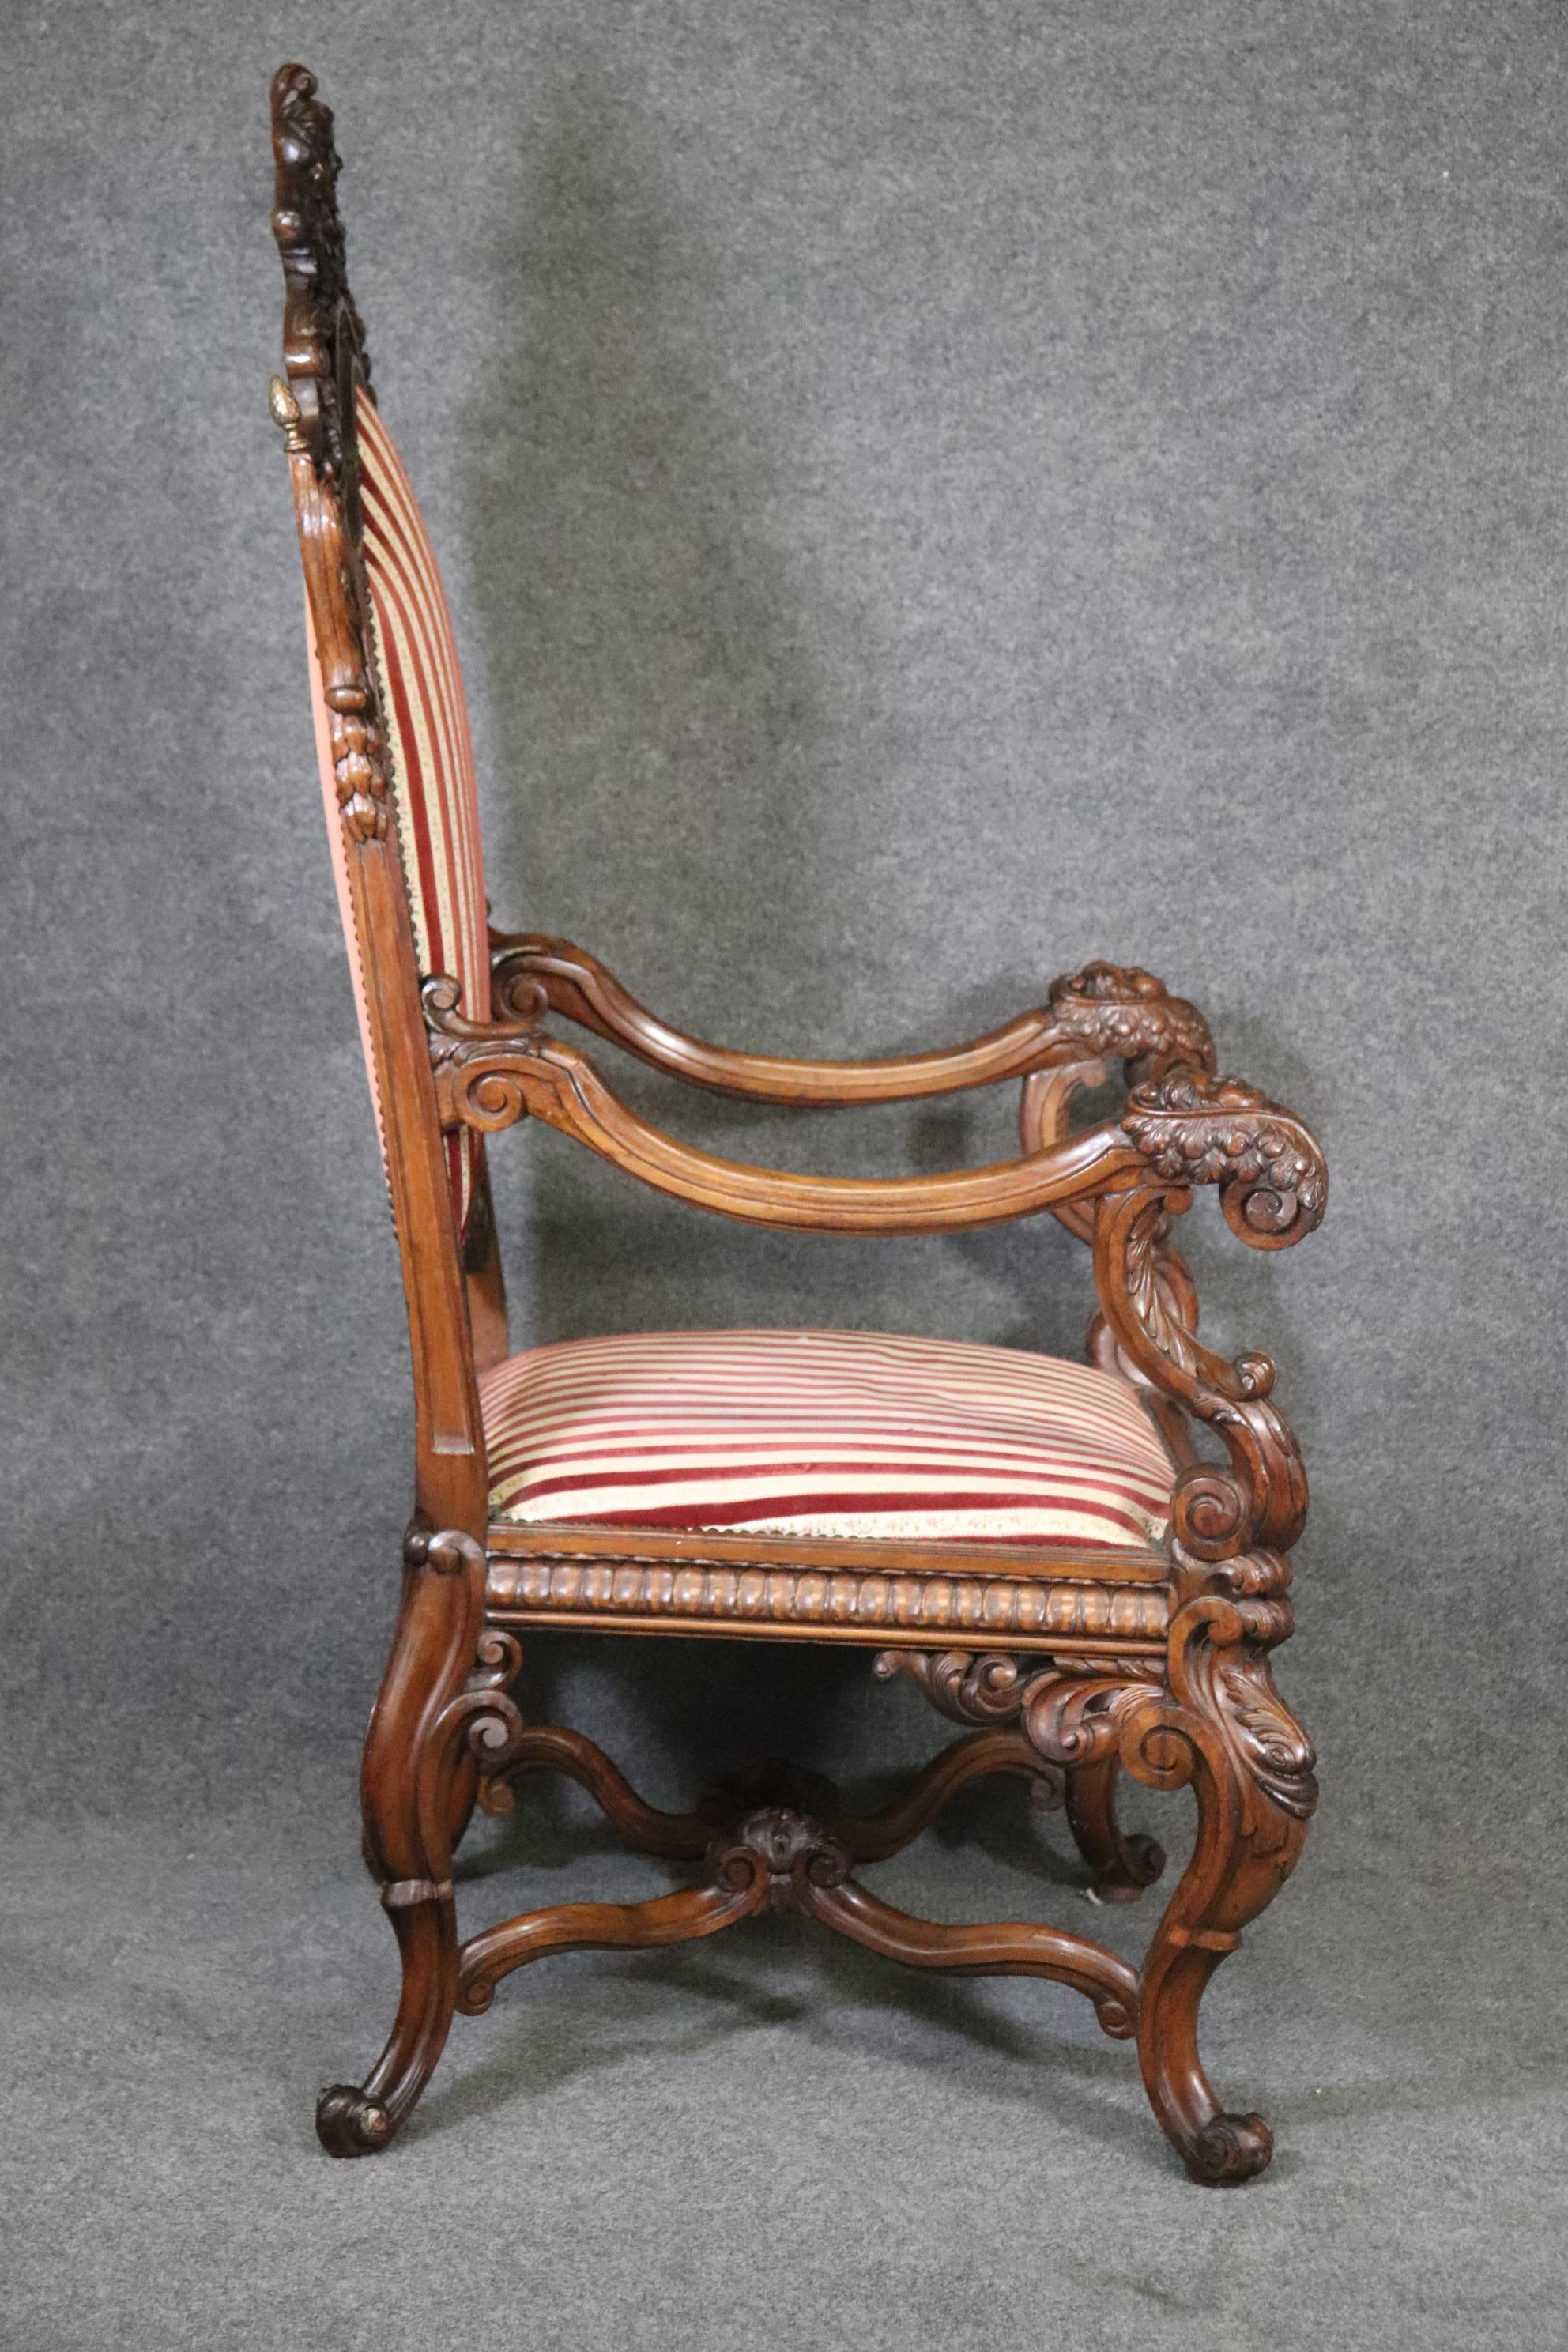 Early 20th Century Large Heavily Carved Figural Victorian Walnut Throne Chair with Putti Cherubs  For Sale